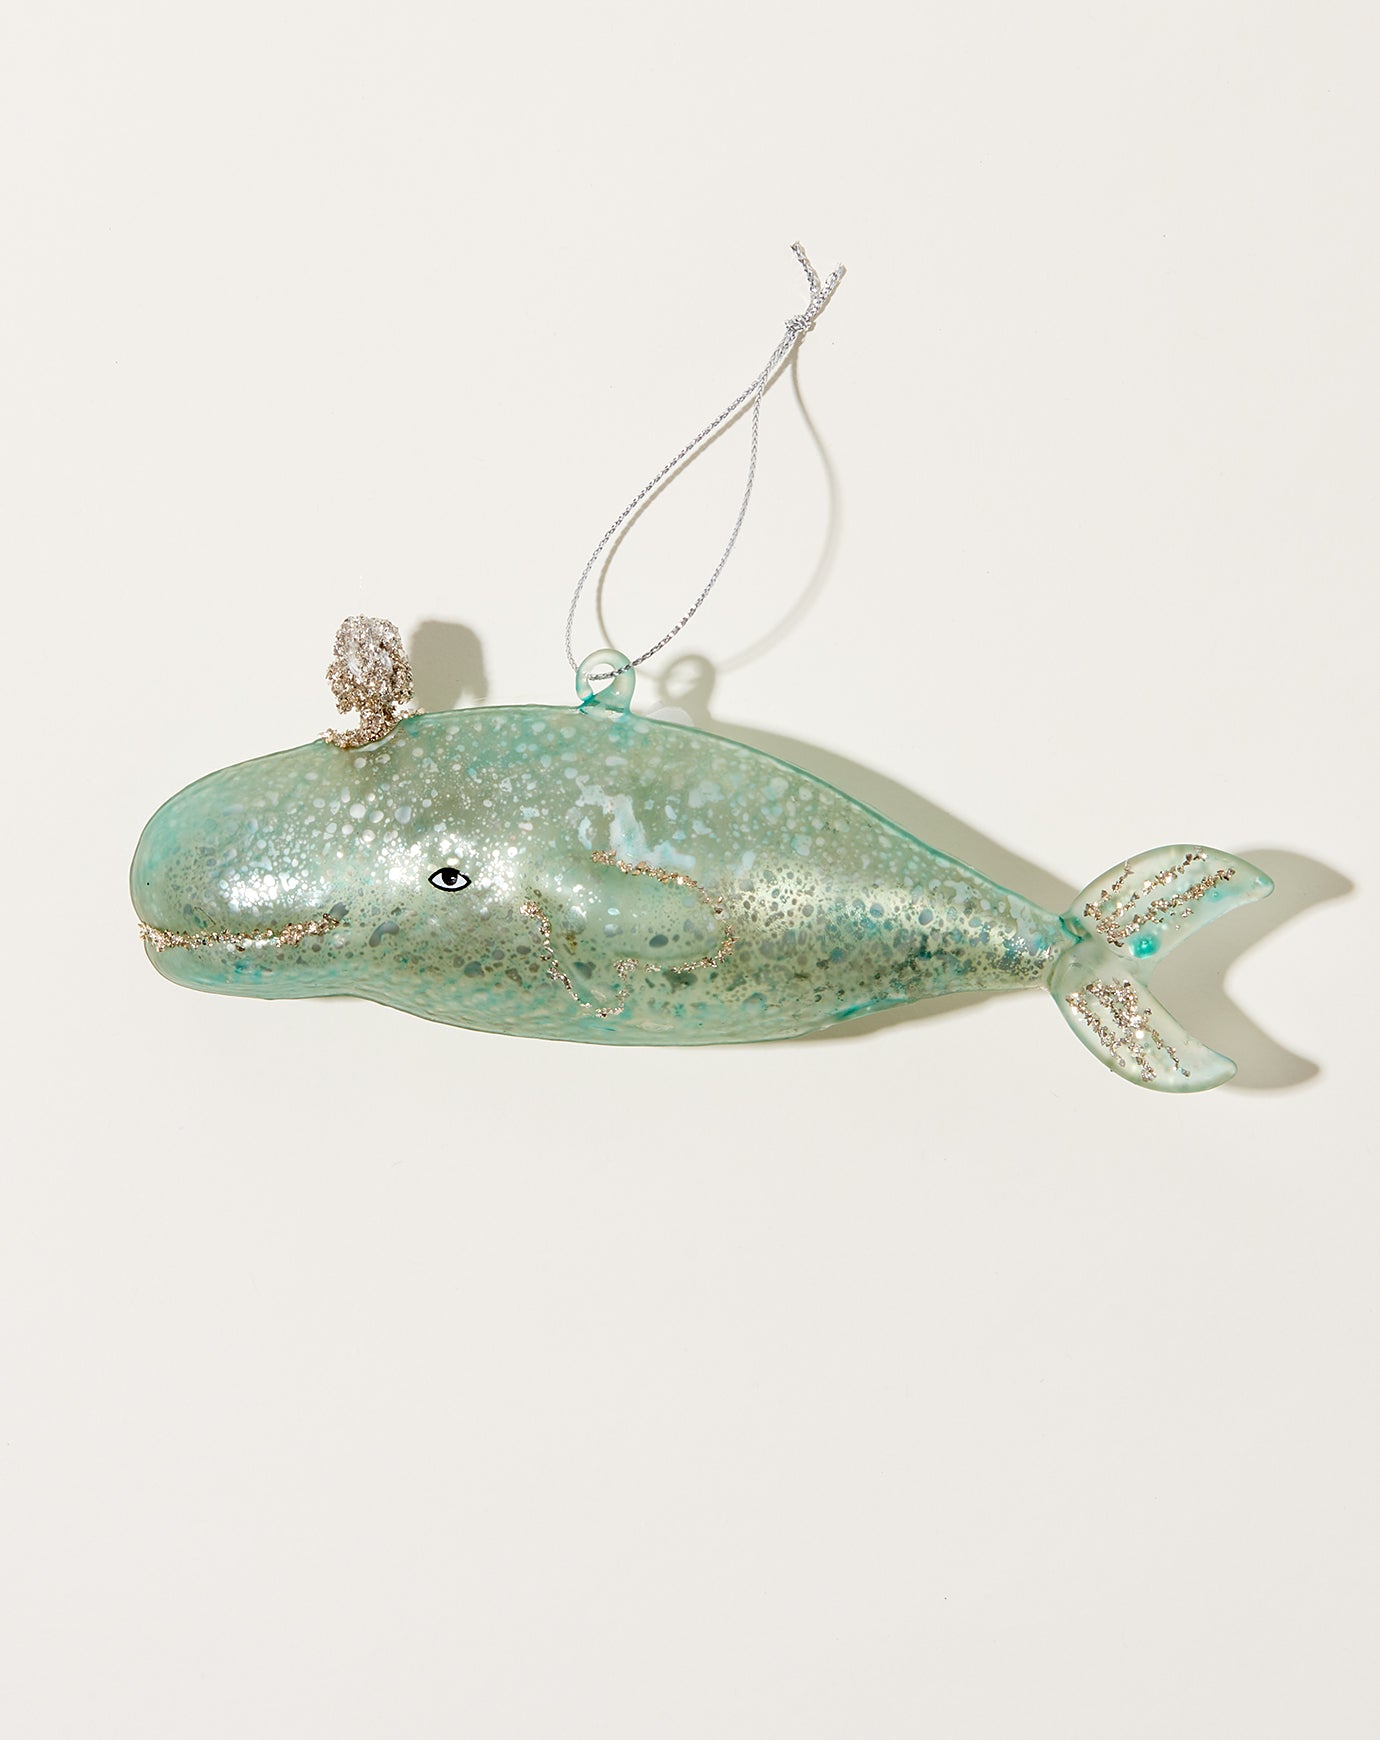 Cody Foster Victorian Whale Ornament in Light Blue